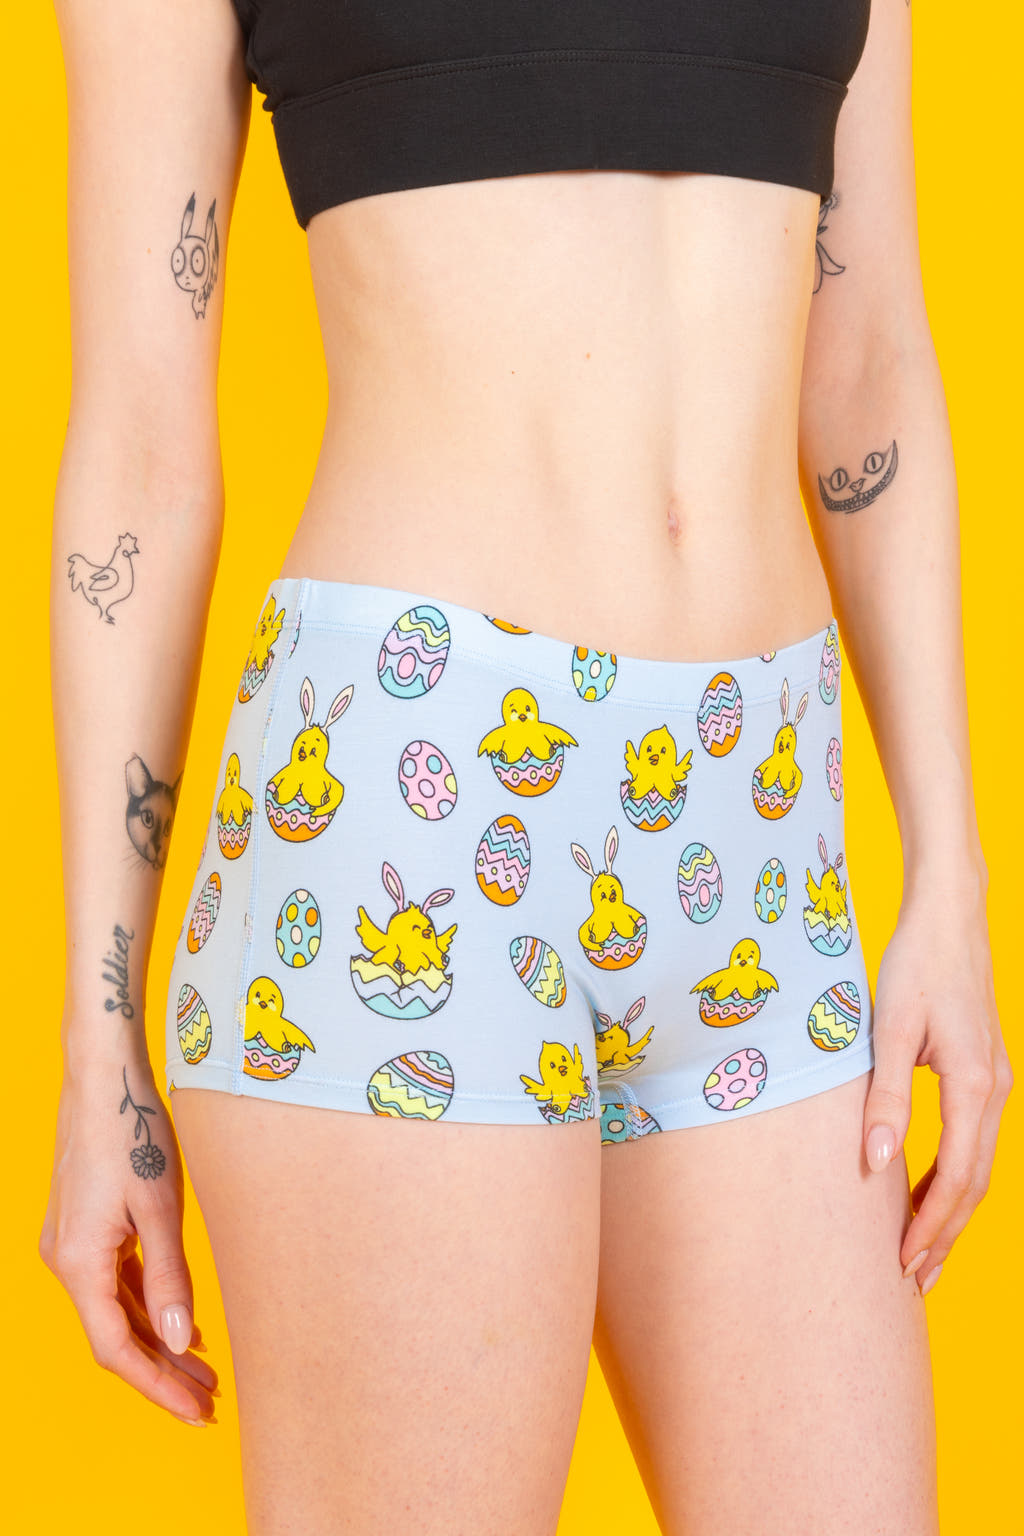 A person wearing Easter-themed boyshort underwear with cartoon chicks and eggs.